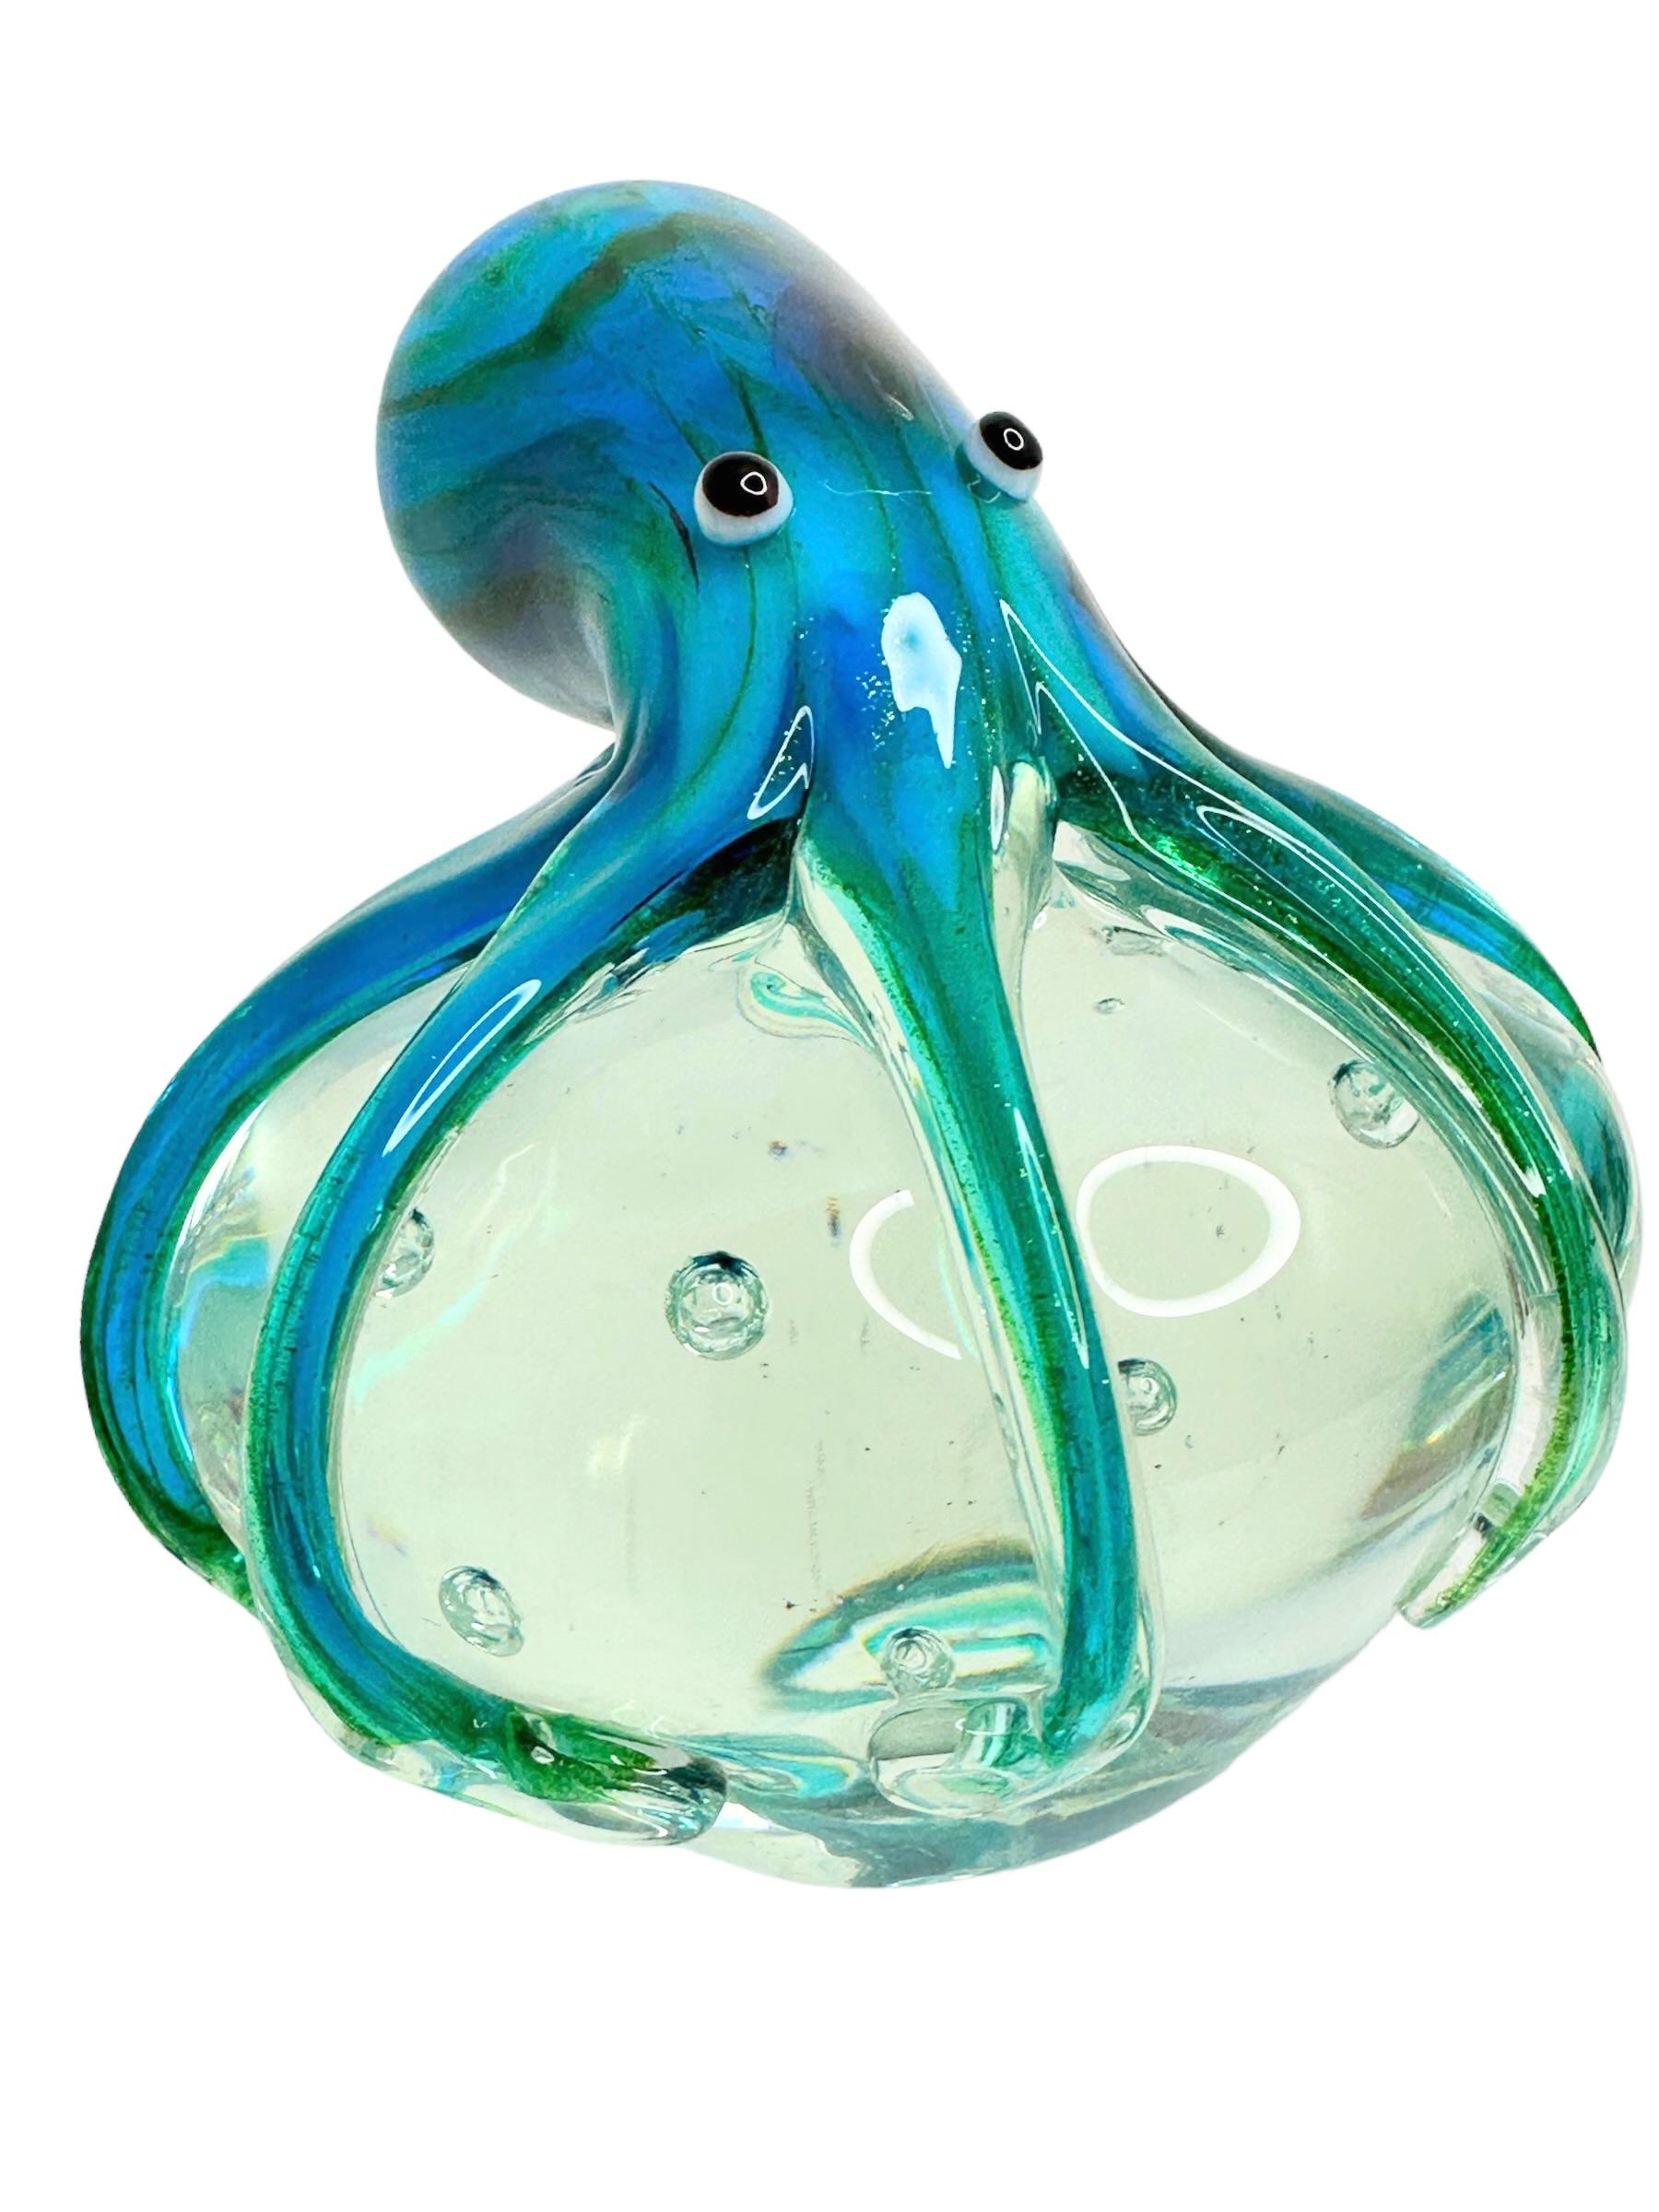 Gorgeous Murano Italian Art Glass Giant Octopus Paperweight, Italy, 1980s